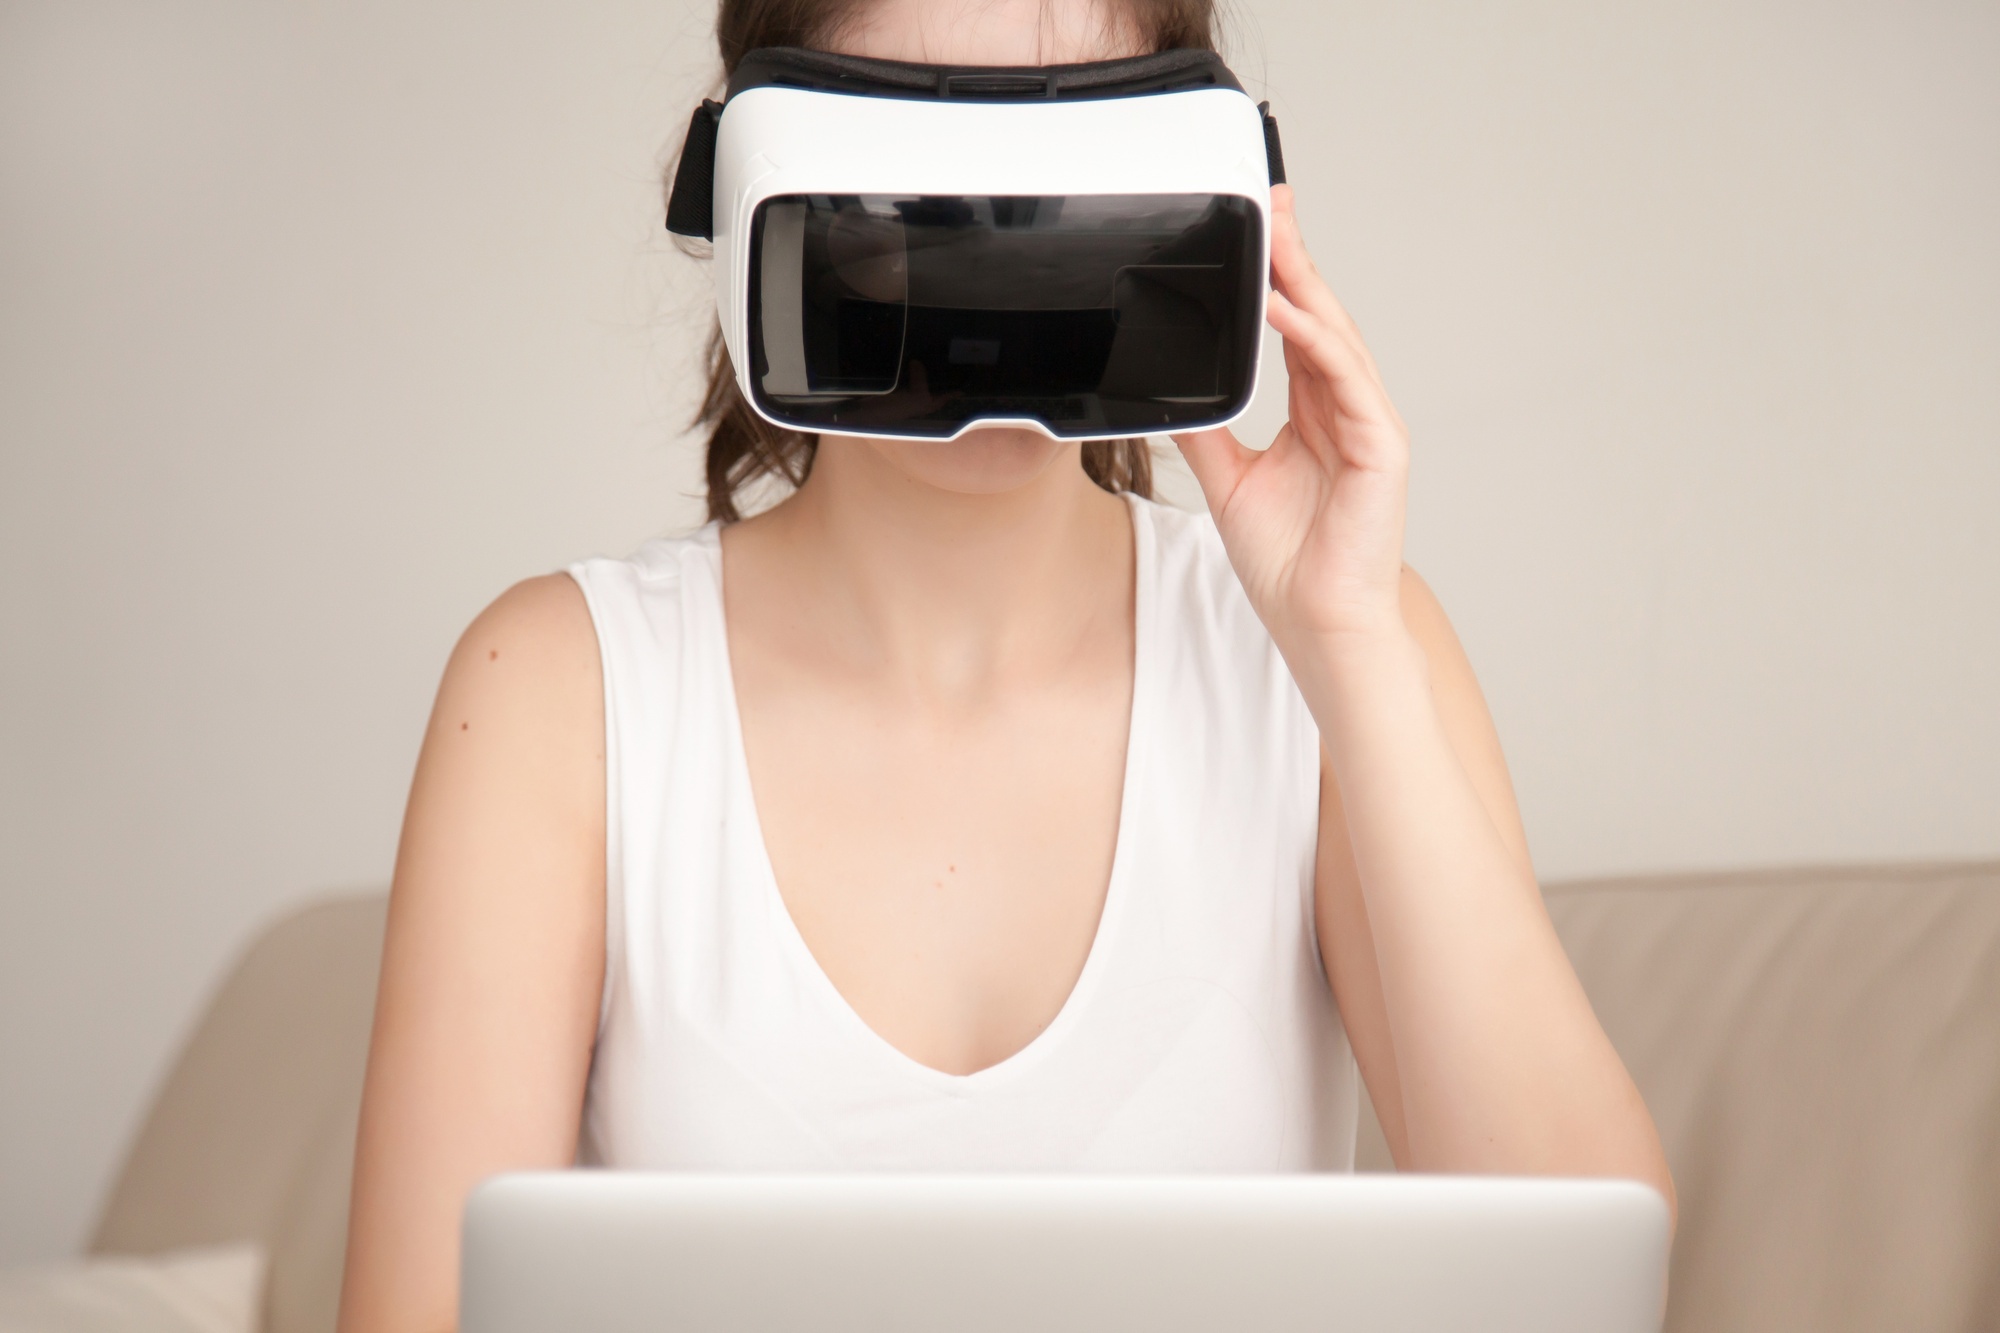 Stock image of VR